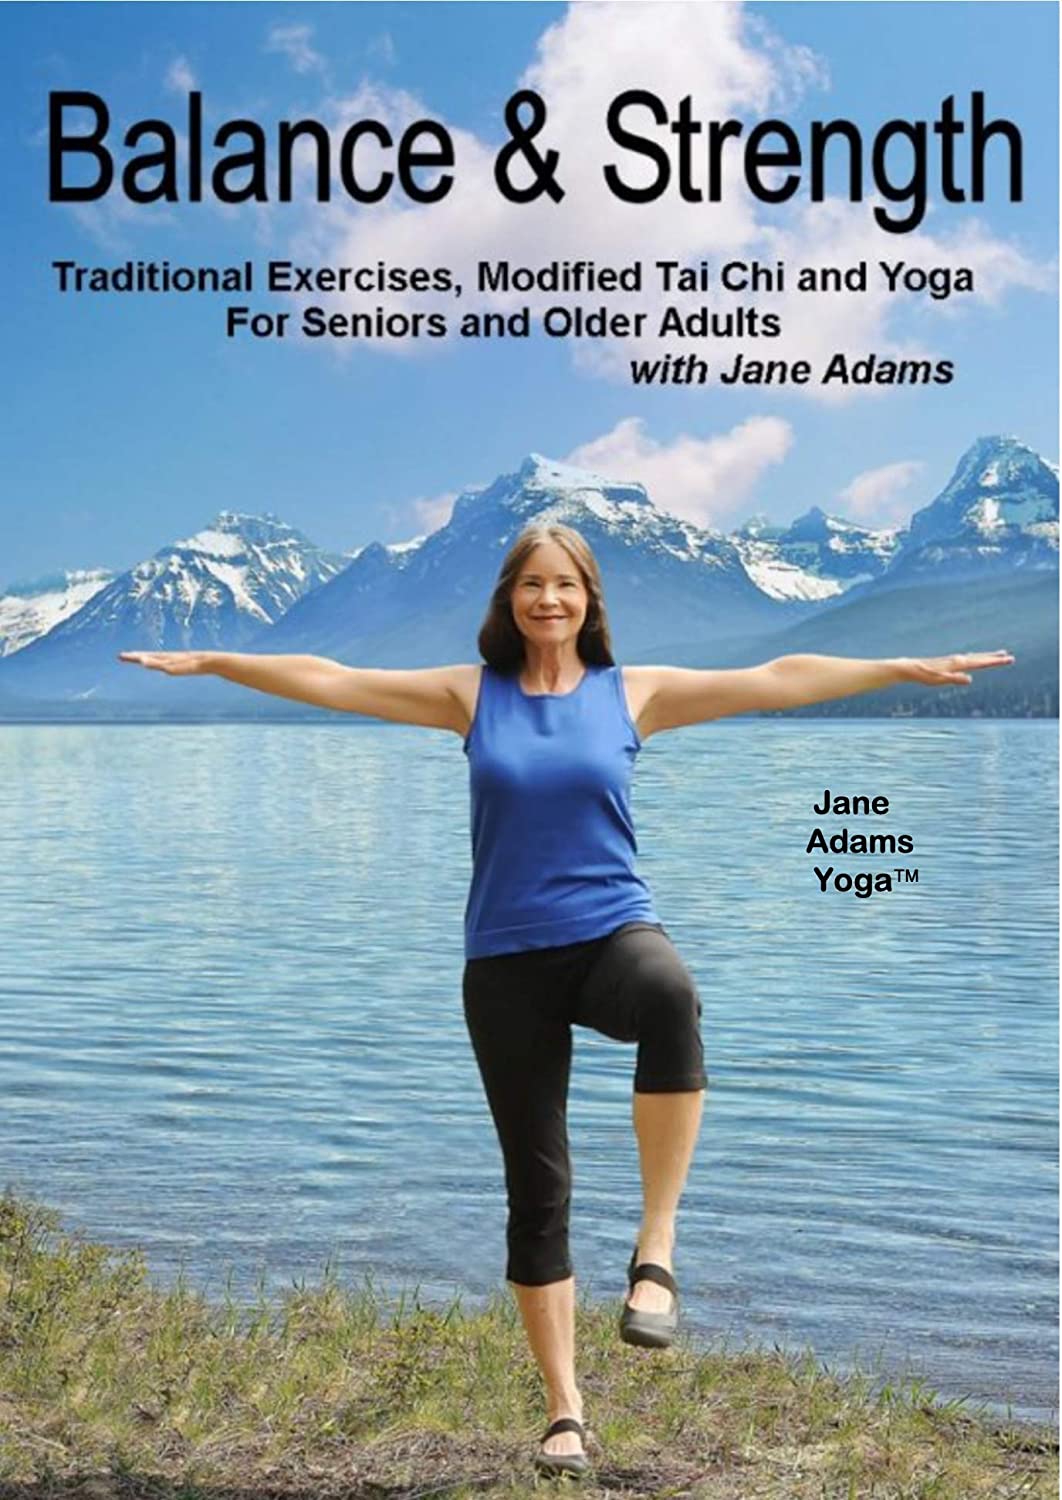 Balance & Strength Exercises for Seniors: 9 Practices, with Traditional Exercises, & Modified Tai Chi & Yoga DVD (Preowned)